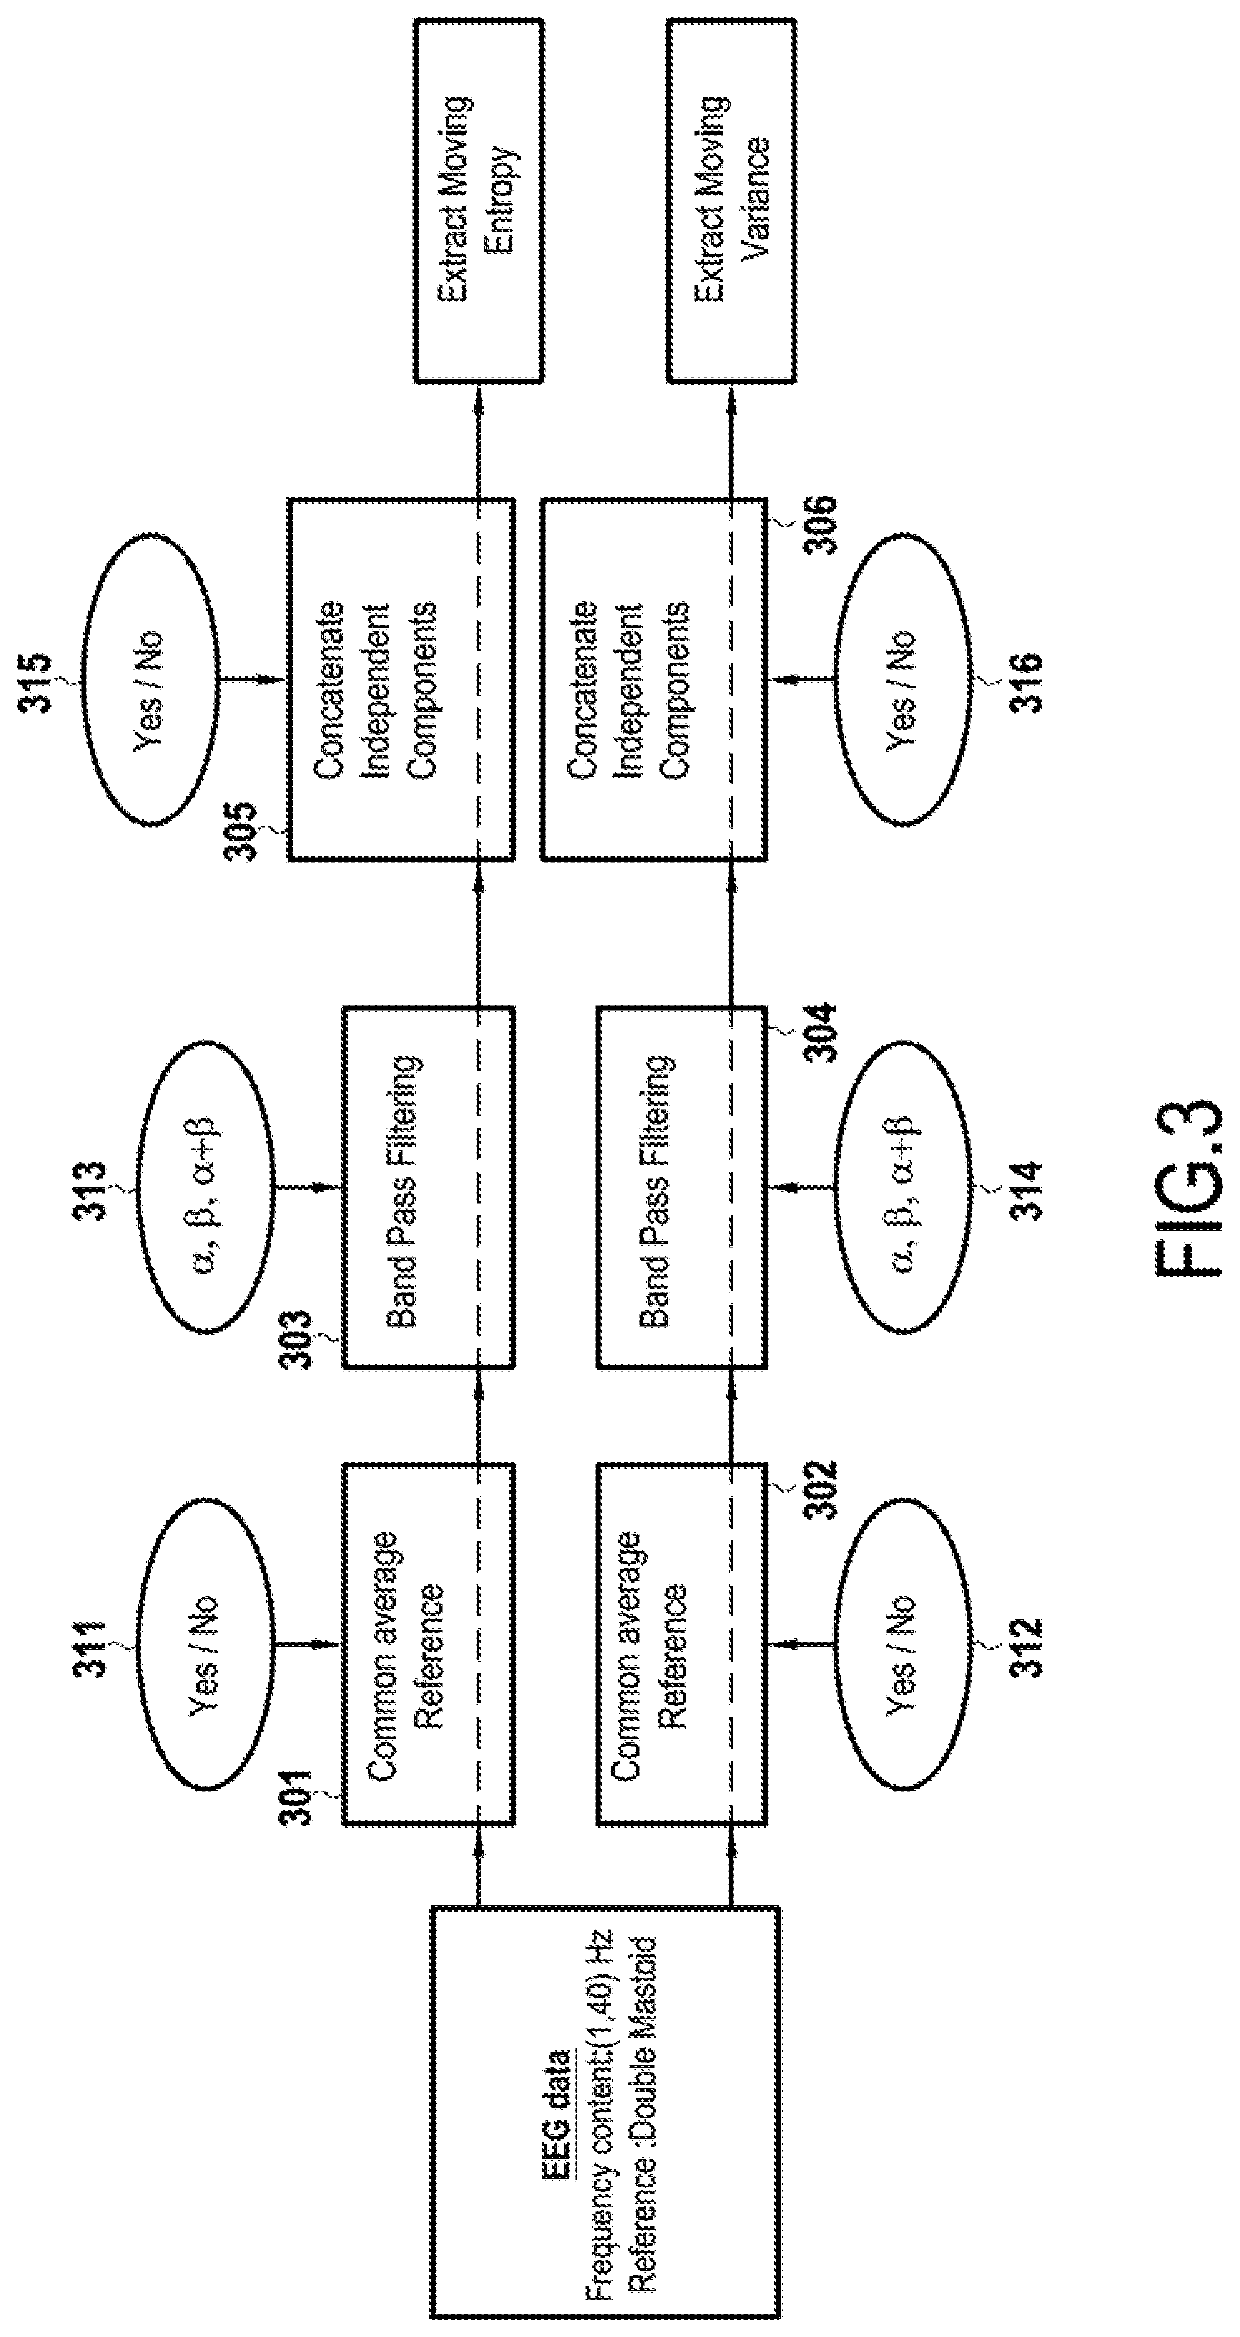 Method and system for determining a driving intention of a user in a vehicle using eeg signals